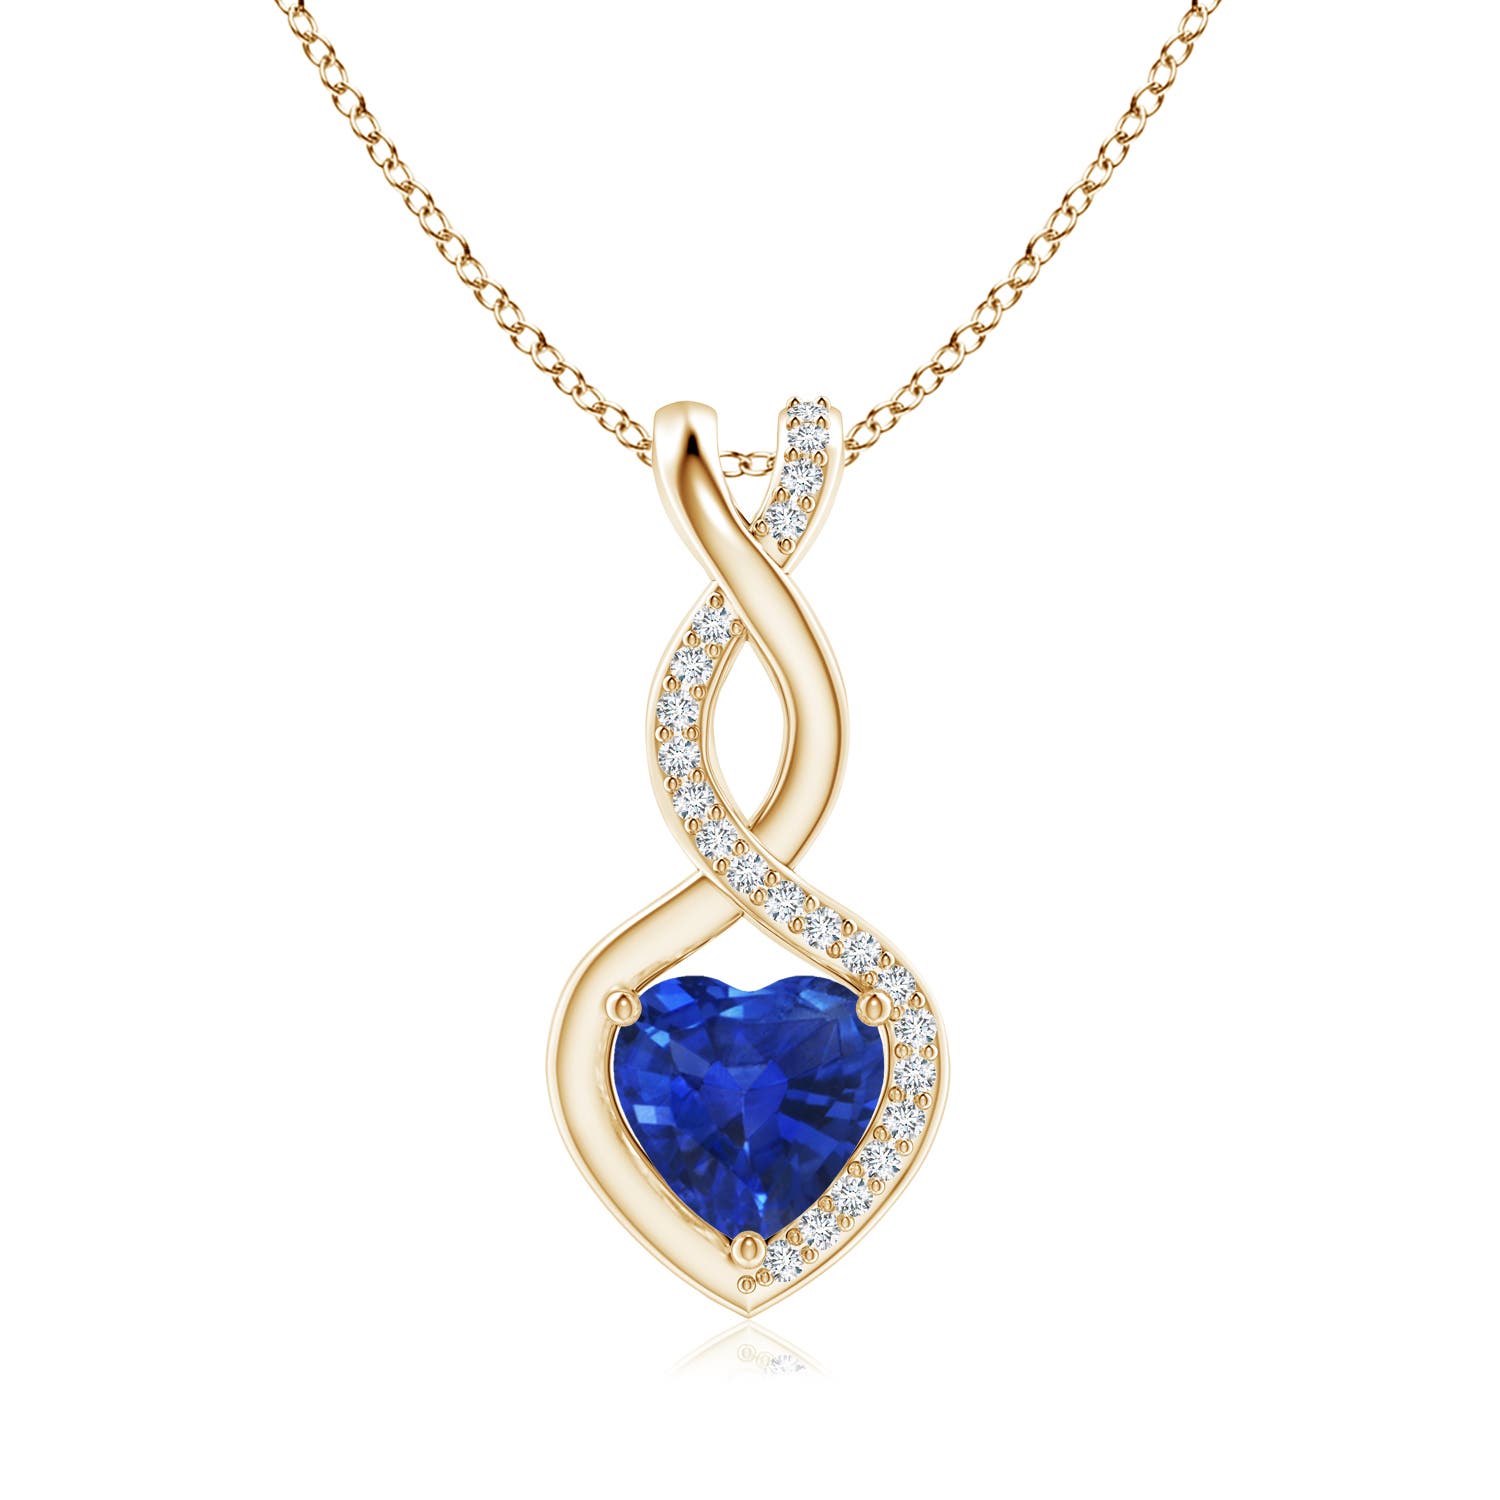 AAA - Blue Sapphire / 0.94 CT / 14 KT Yellow Gold